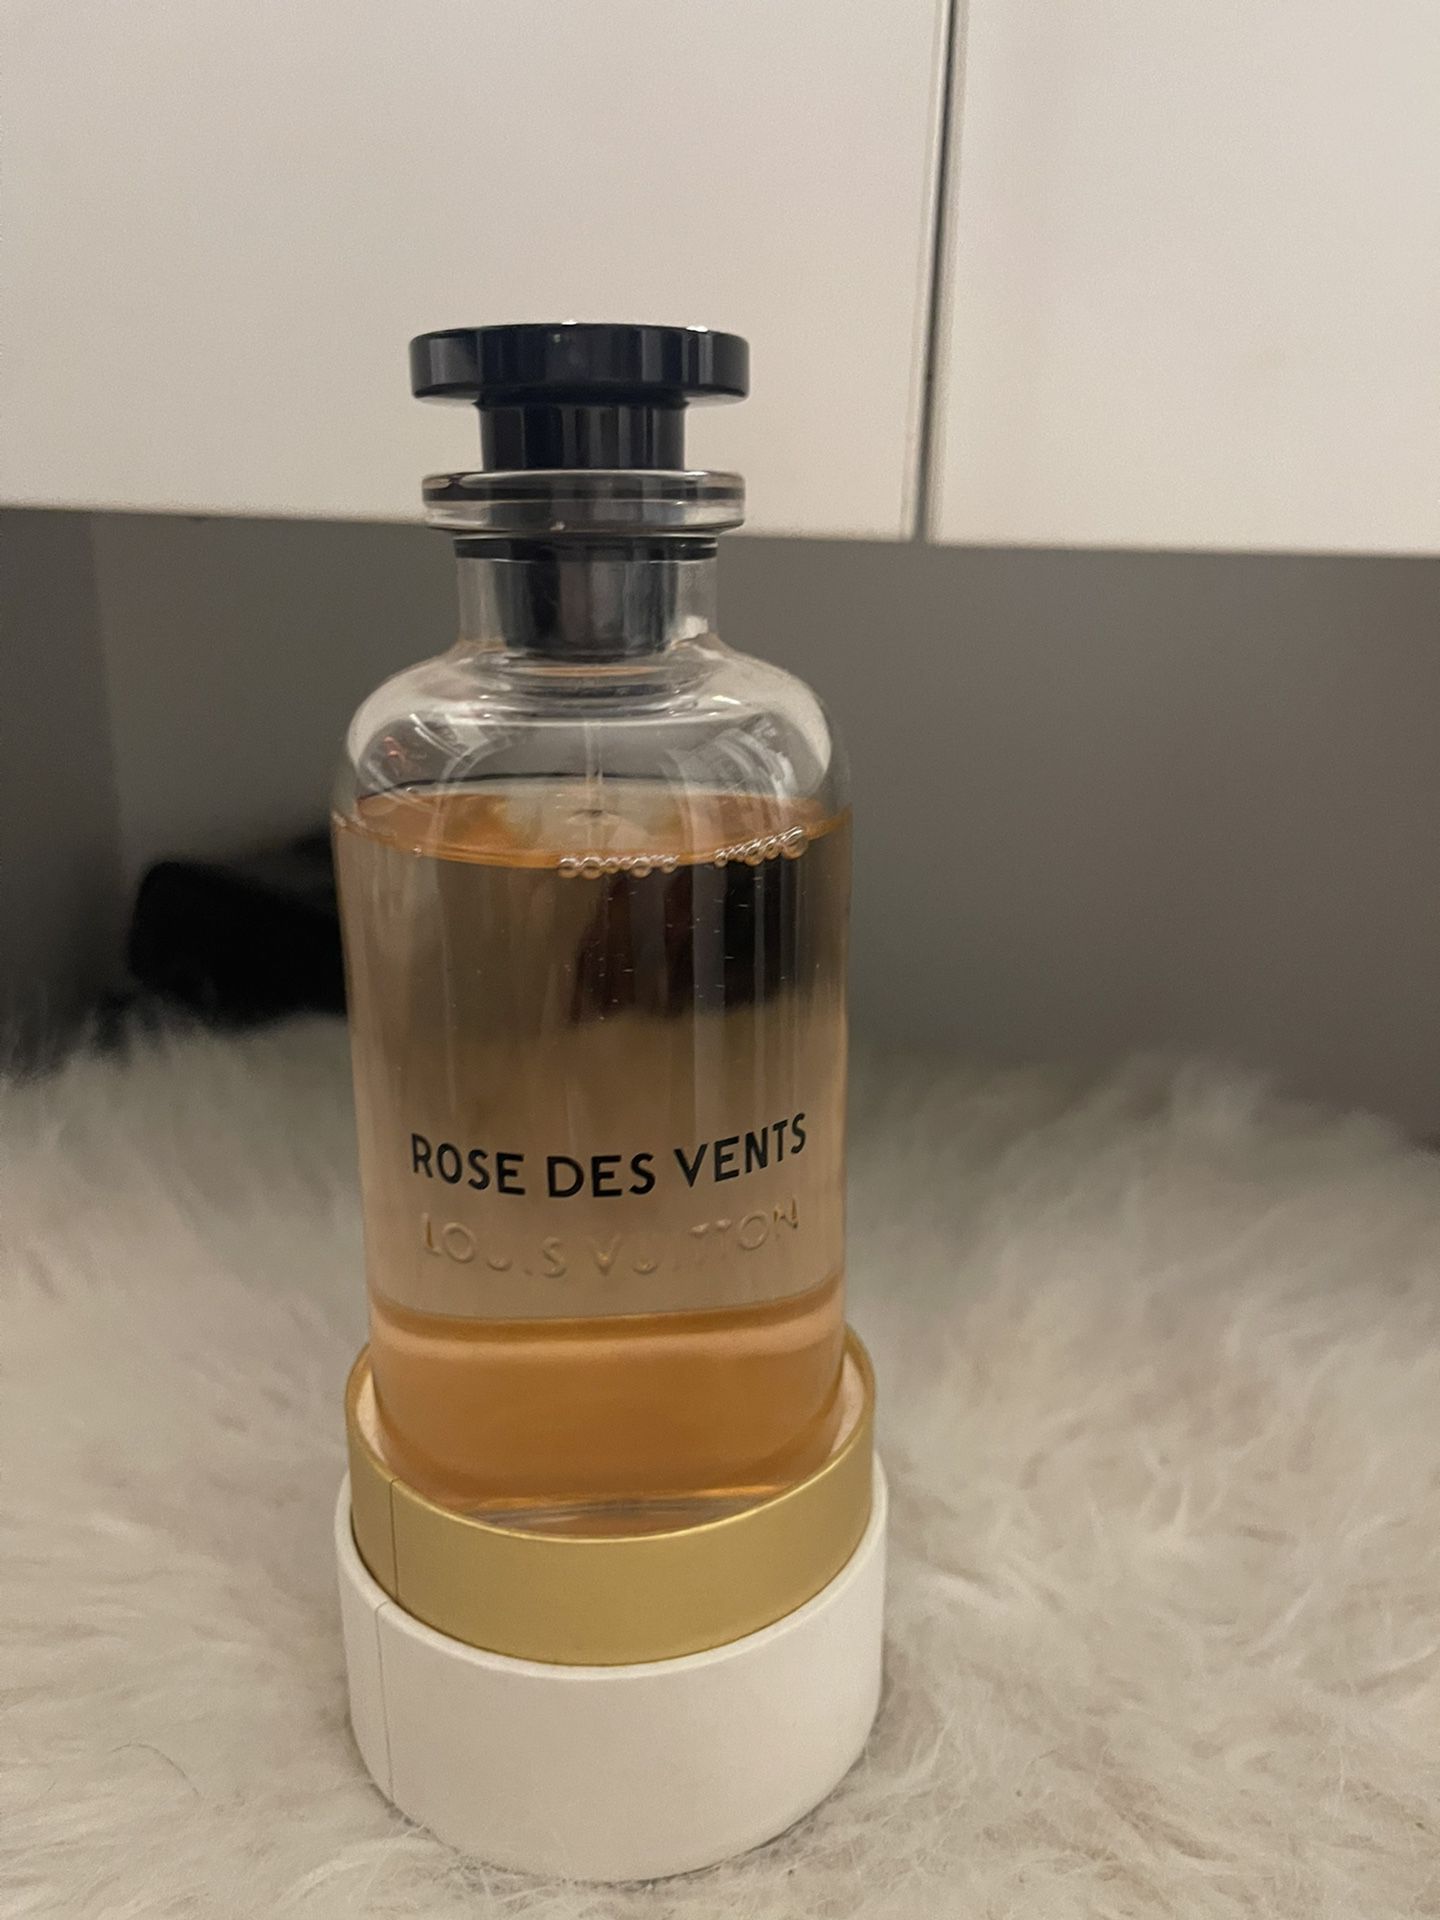 Rose Des Vents Louis Vuiton Perfume Women for Sale in Queens, NY - OfferUp